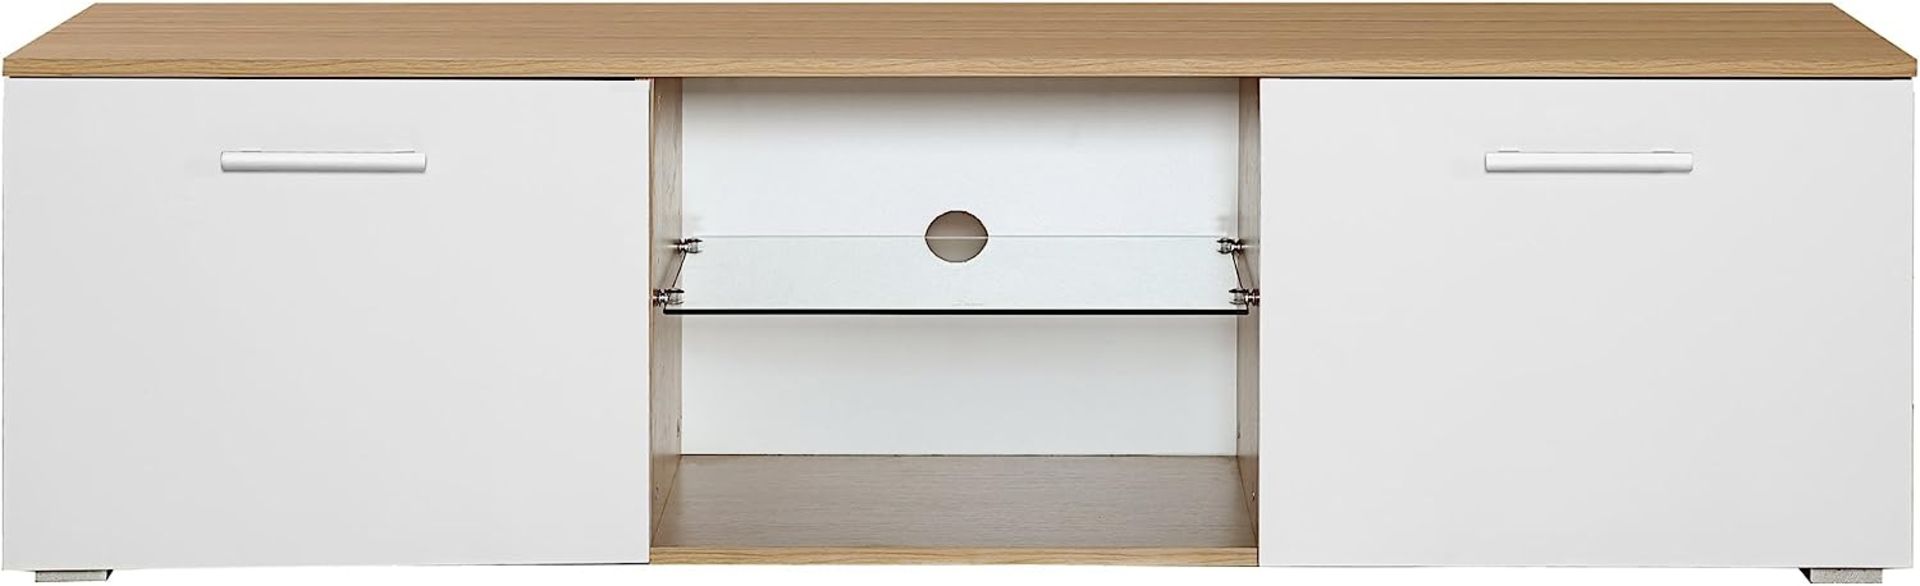 5 X BRAND NEW HARMIN MODERN 160CM TV STAND CABINET UNIT WITH HIGH GLOSS DOORS (WHITE ON OAK) - Image 4 of 9